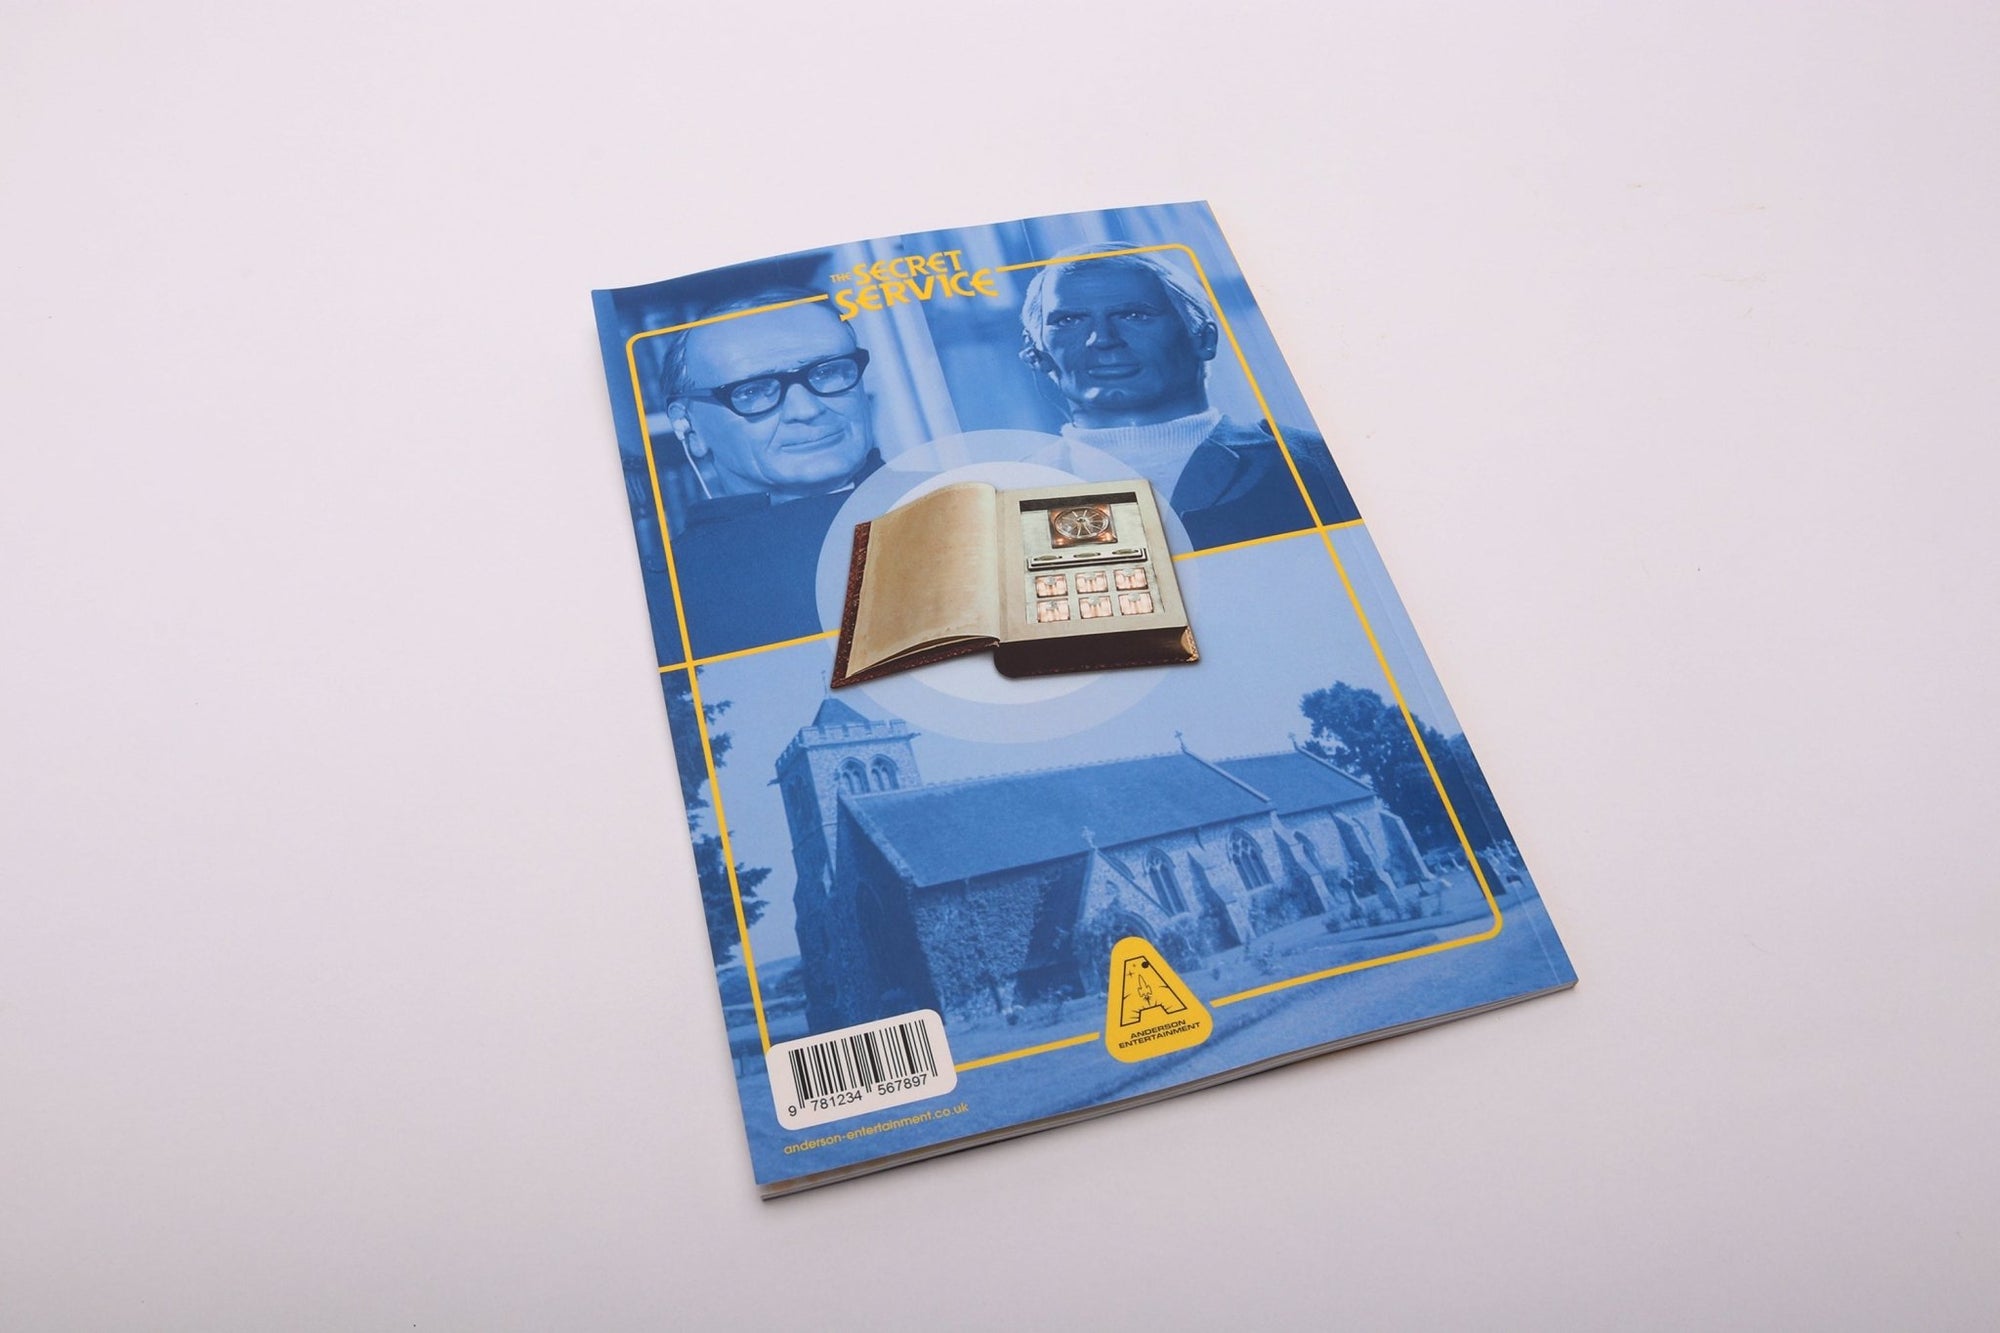 The Secrets of The Secret Service Bookazine - The Gerry Anderson Store